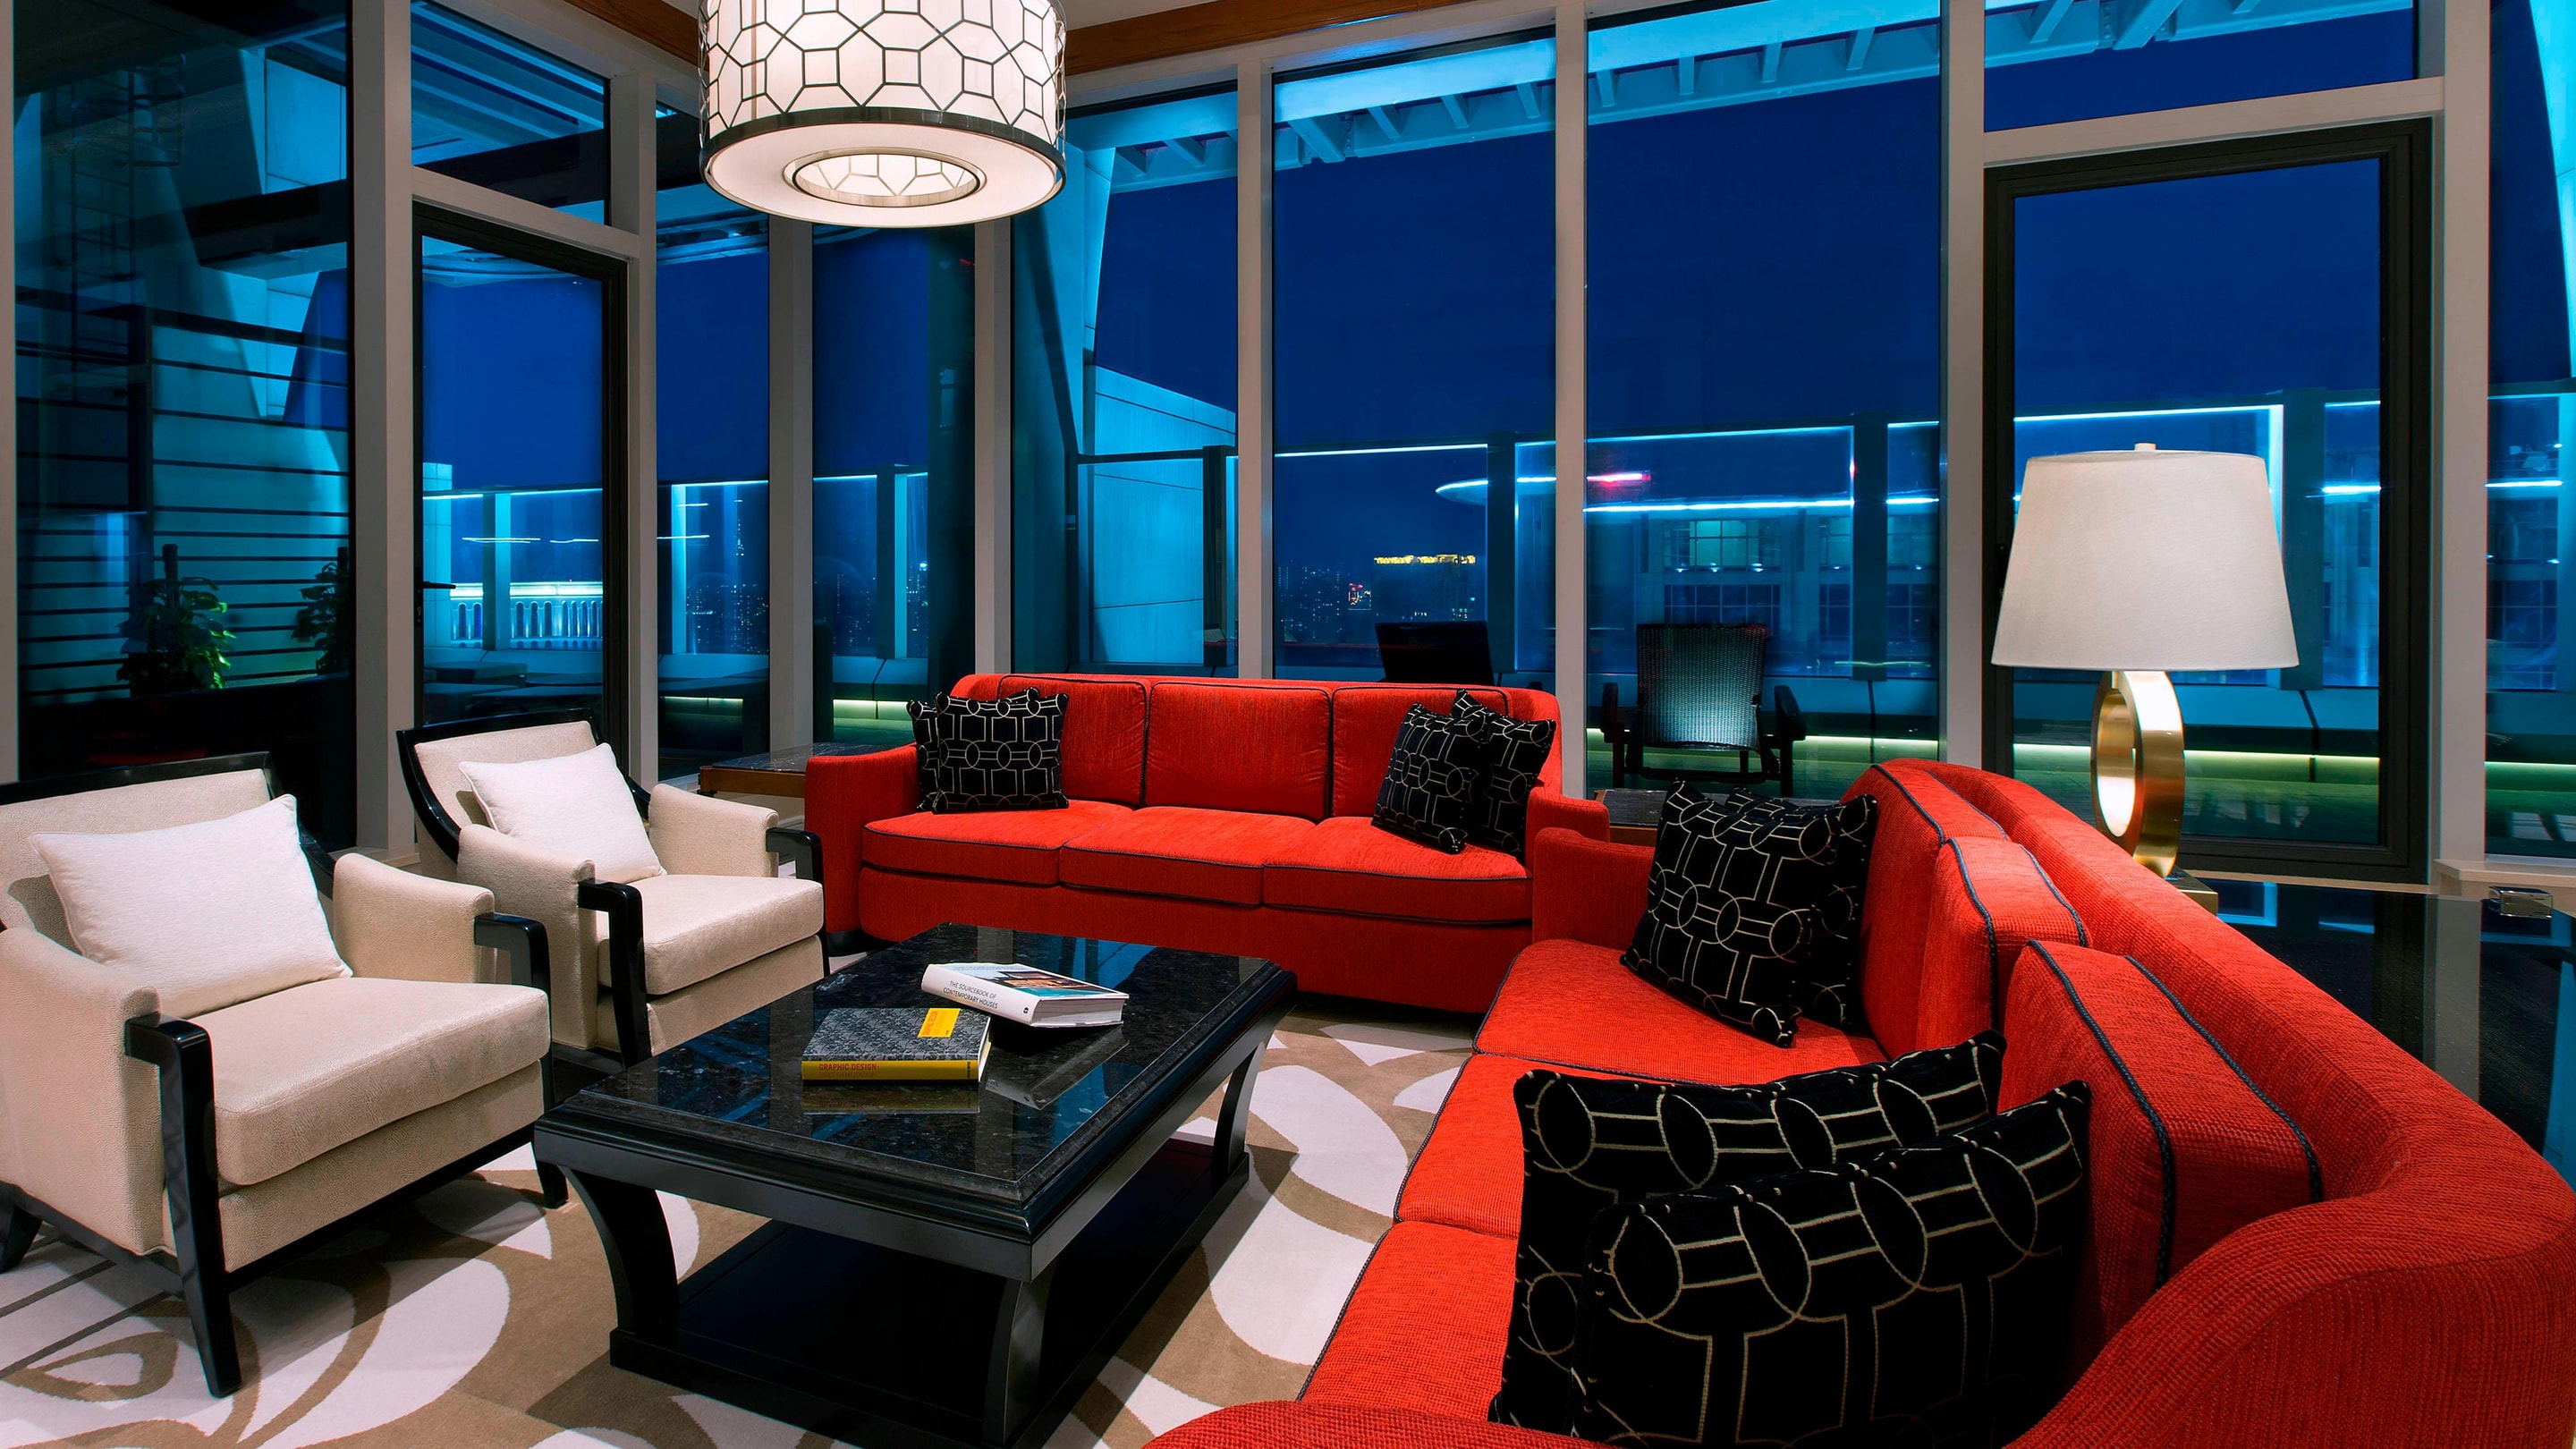 Terrace suite living area with seating and red couches